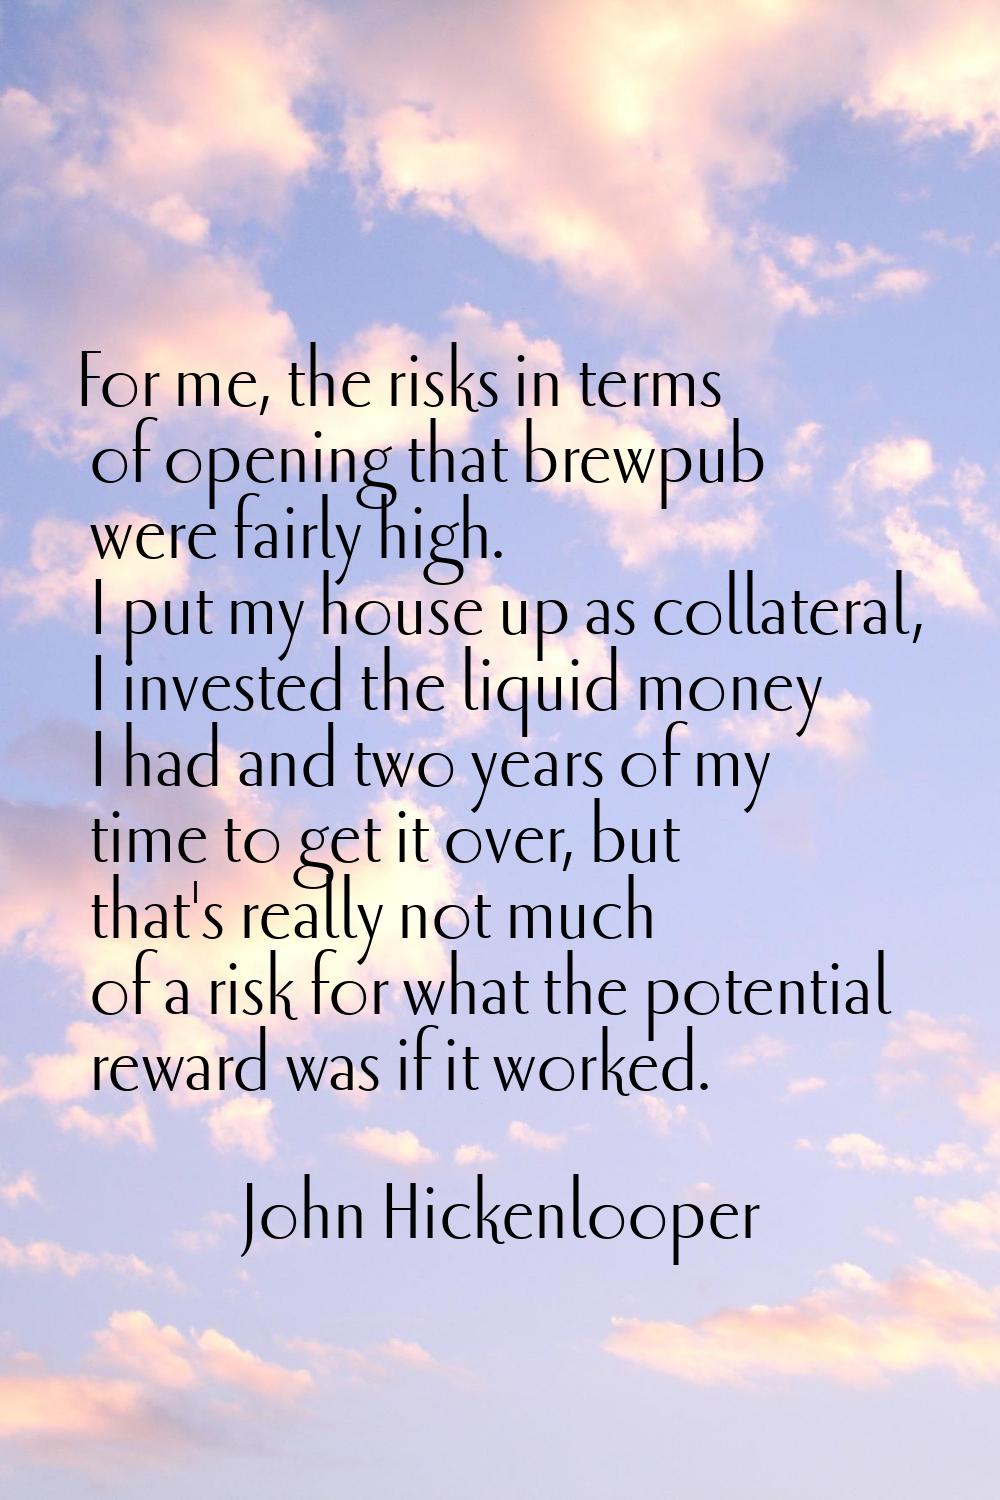 For me, the risks in terms of opening that brewpub were fairly high. I put my house up as collatera